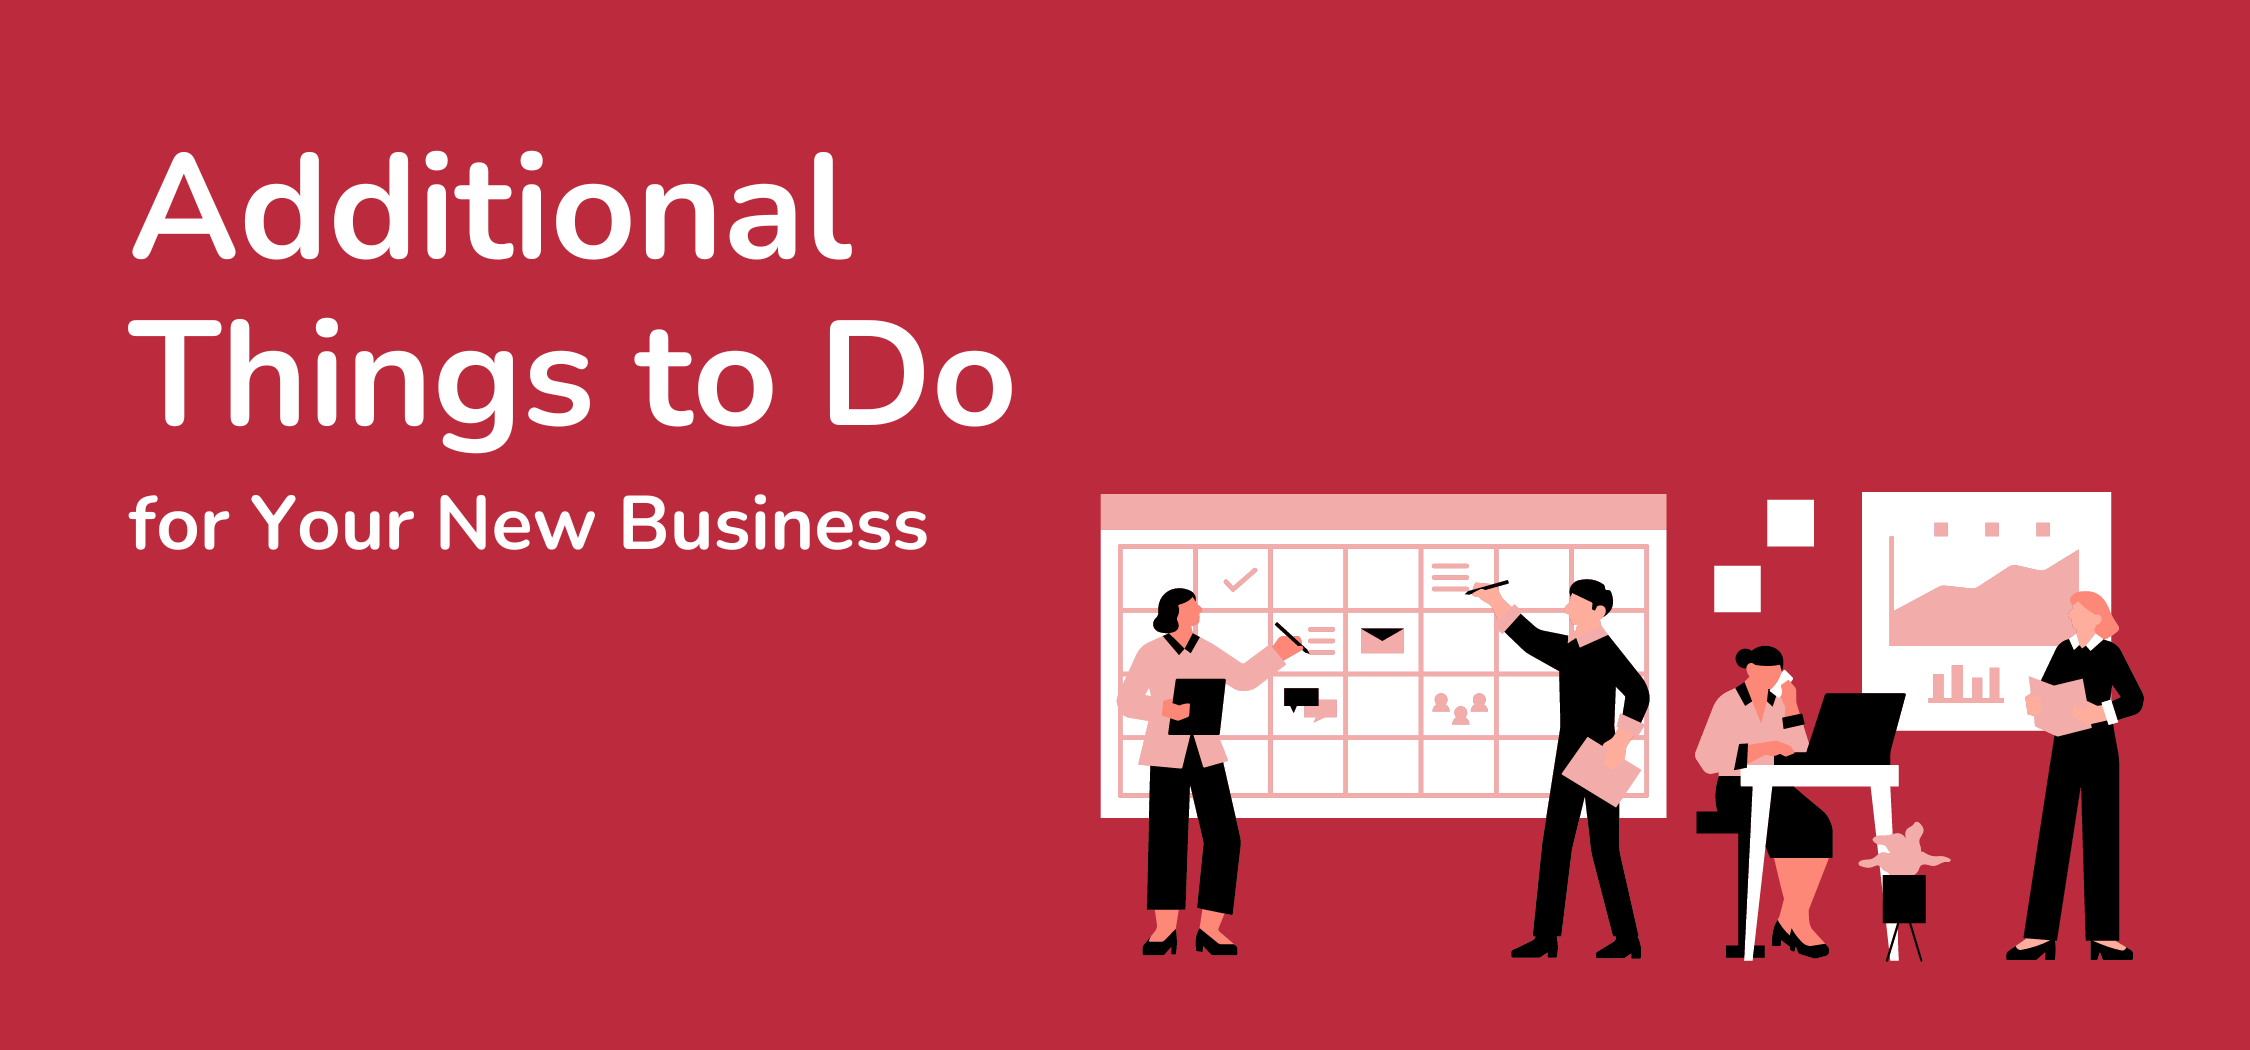 Additional Things to Do for Your New Business